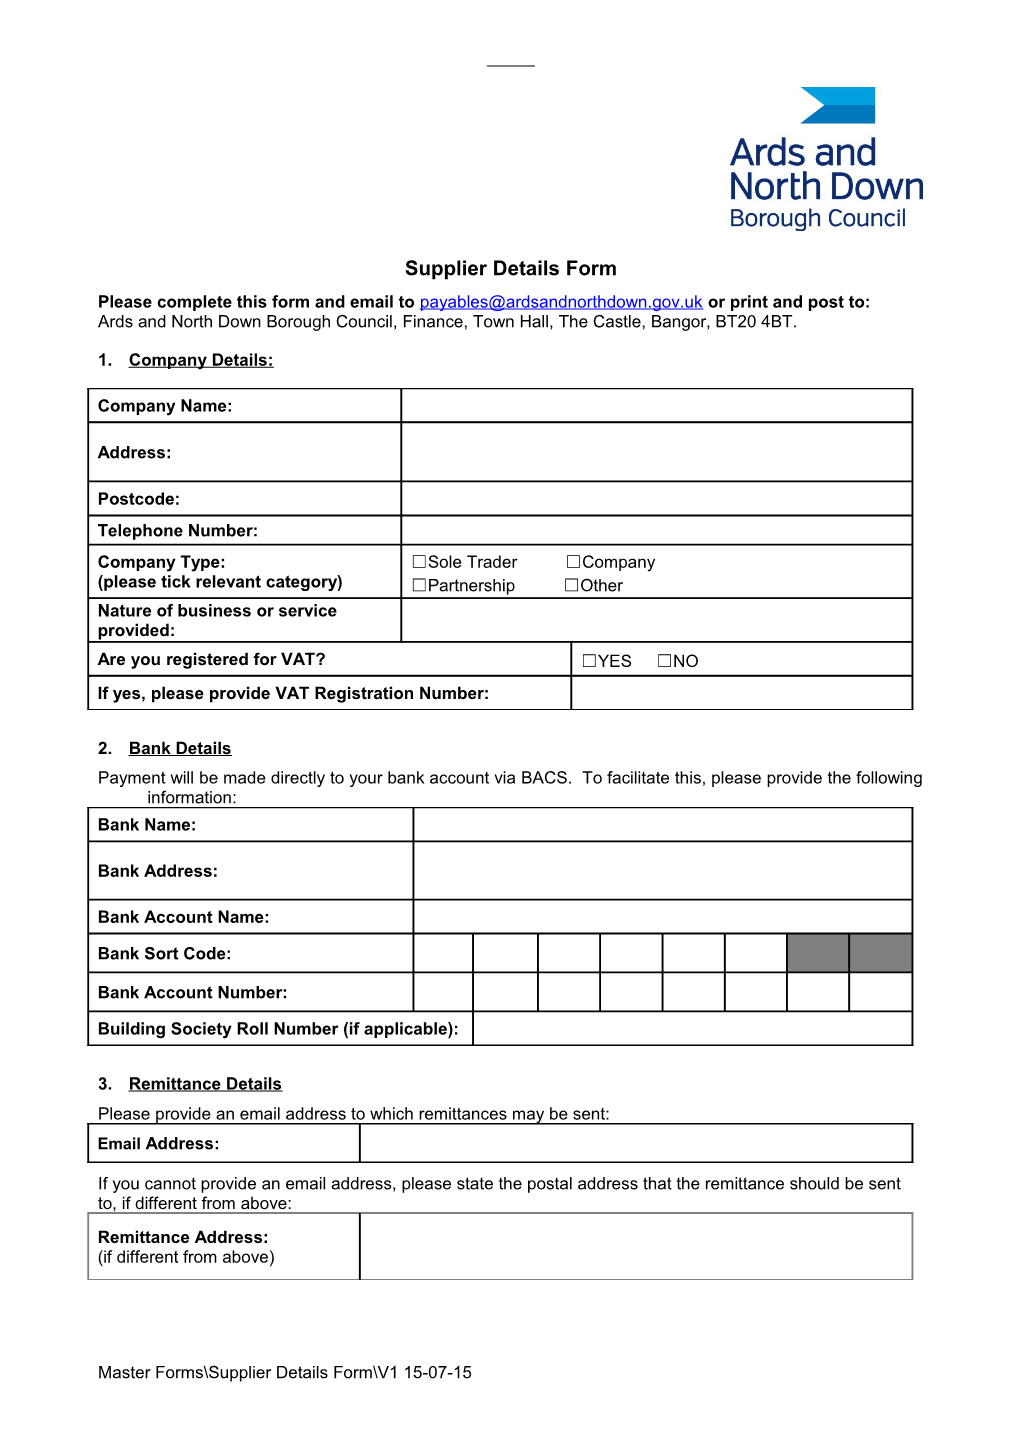 Please Complete This Form and Email to Or Print and Post To